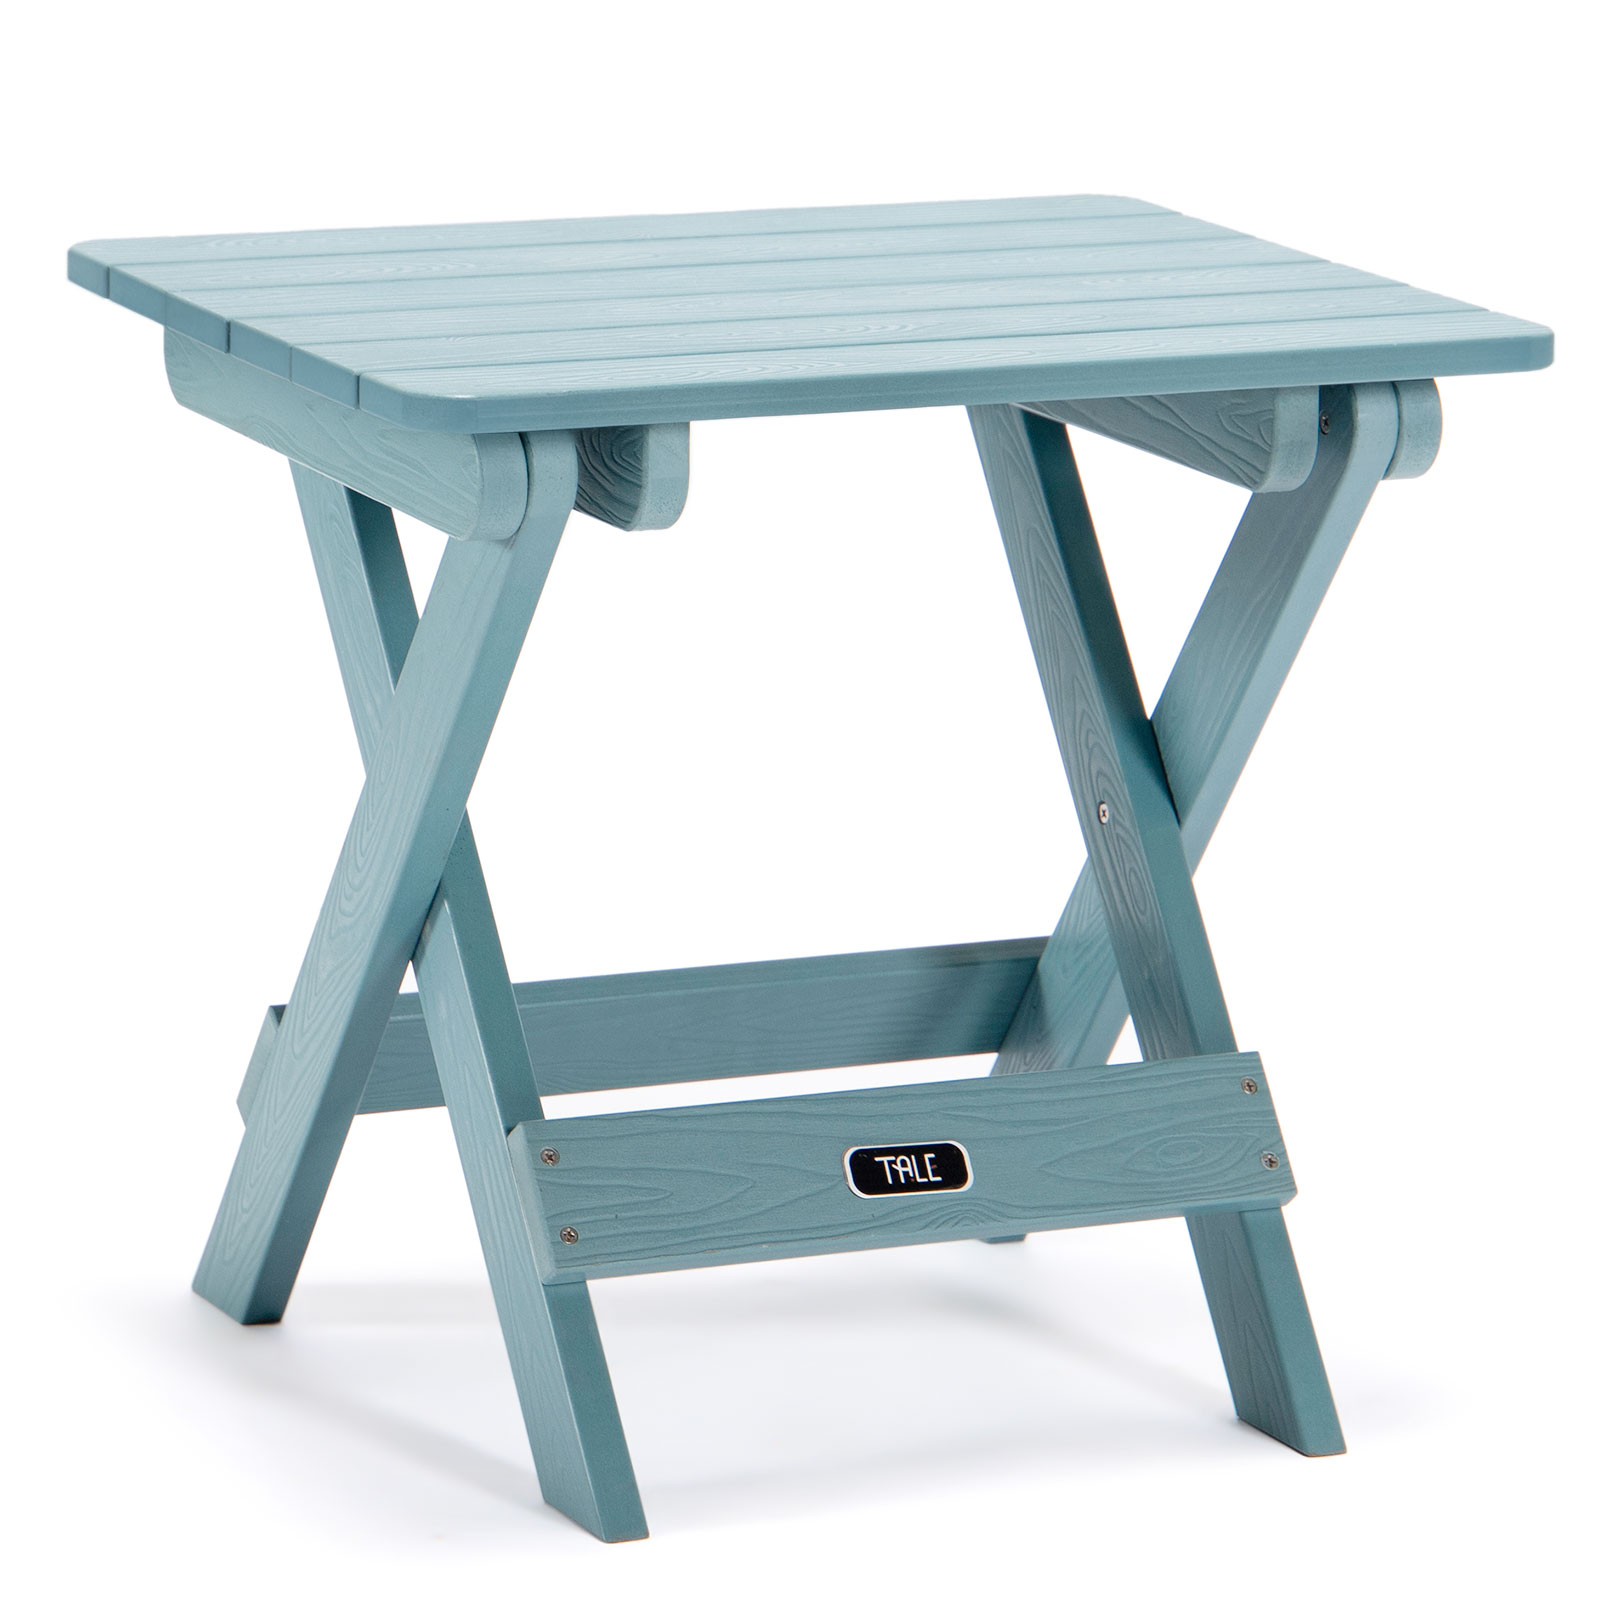 TALE Adirondack Portable Folding Side Table Square All-Weather and Fade-Resistant Plastic Wood Table Perfect for Outdoor Garden, Beach, Camping, Picnics Blue-Boyel Living